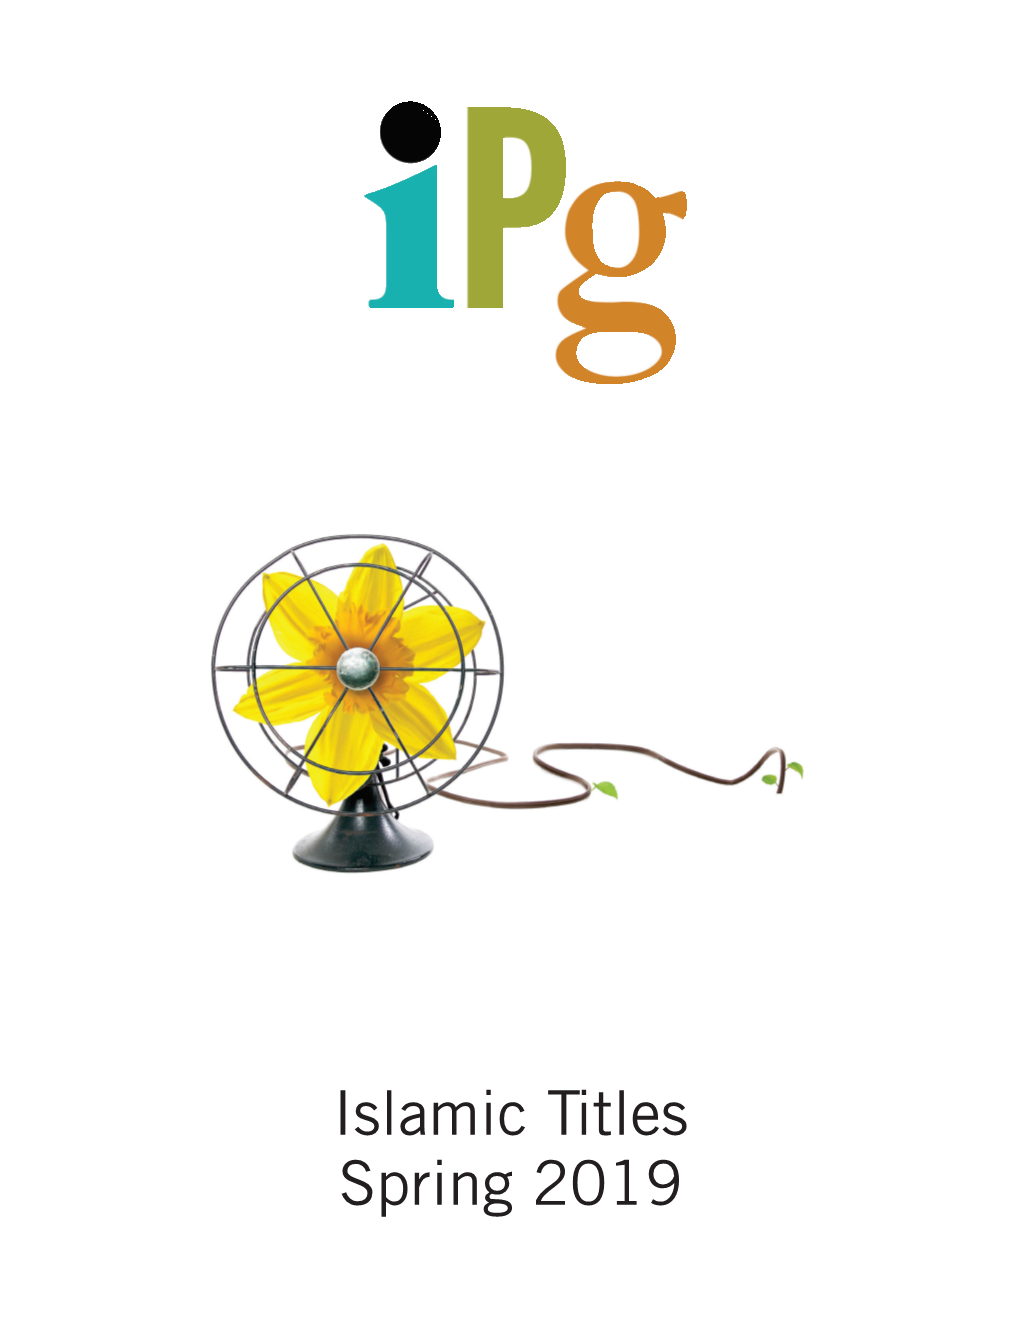 IPG Spring 2019 Islamic Titles - March 2019 Page 1